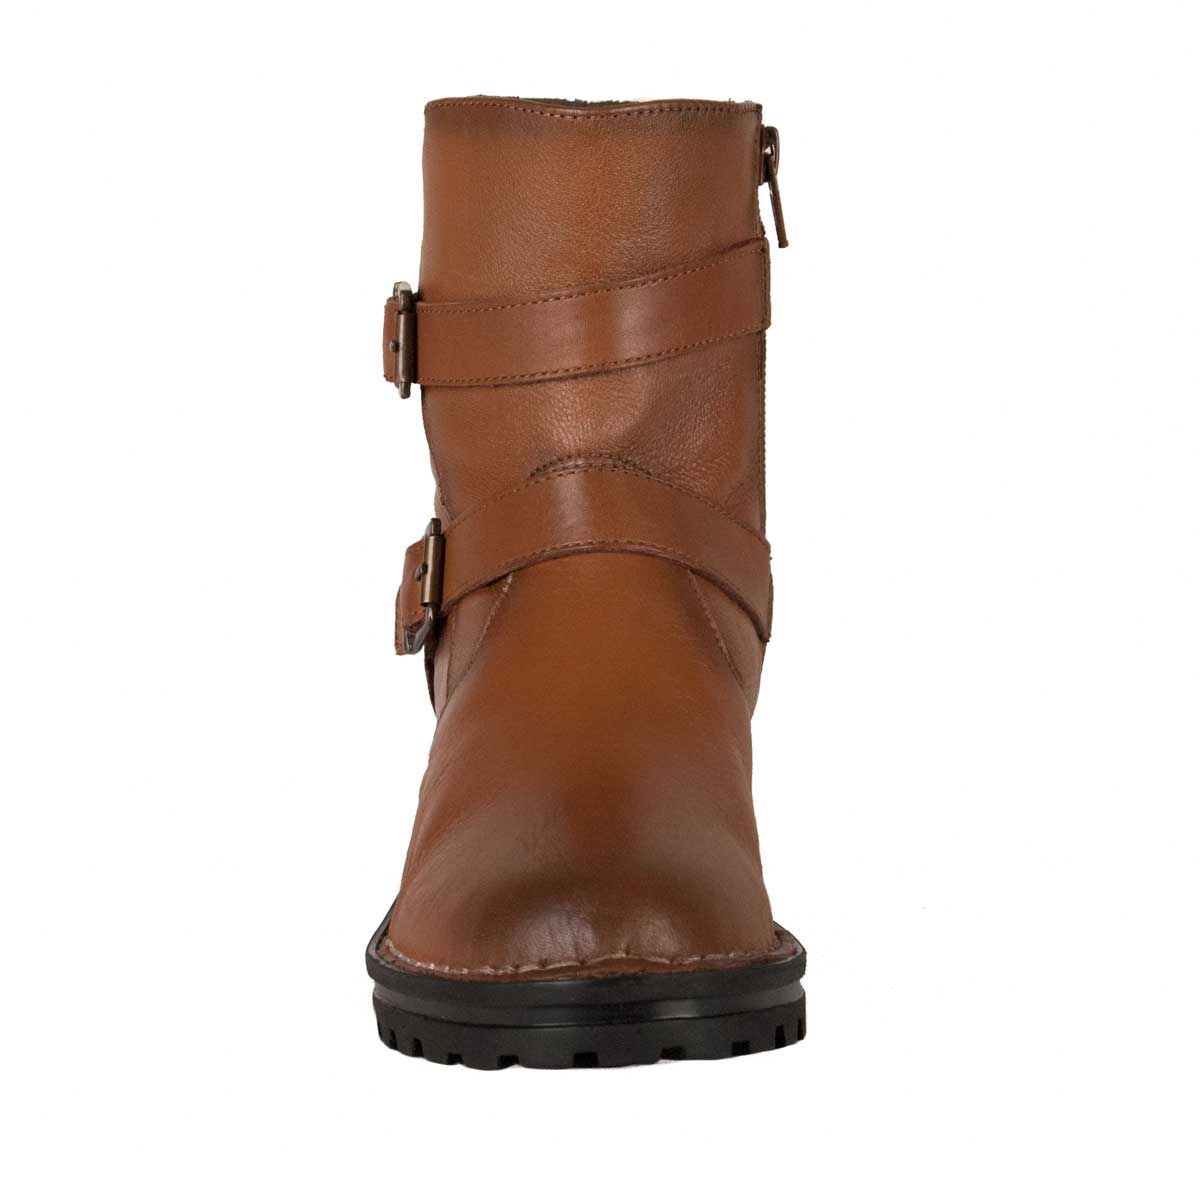 Ideal bike style boot with buckles. Manufactured in very soft natural skin and comfortable. Anti-slip rubber floor. Interior zipper. Previous and later buttress. Capsule collection by Wikers.